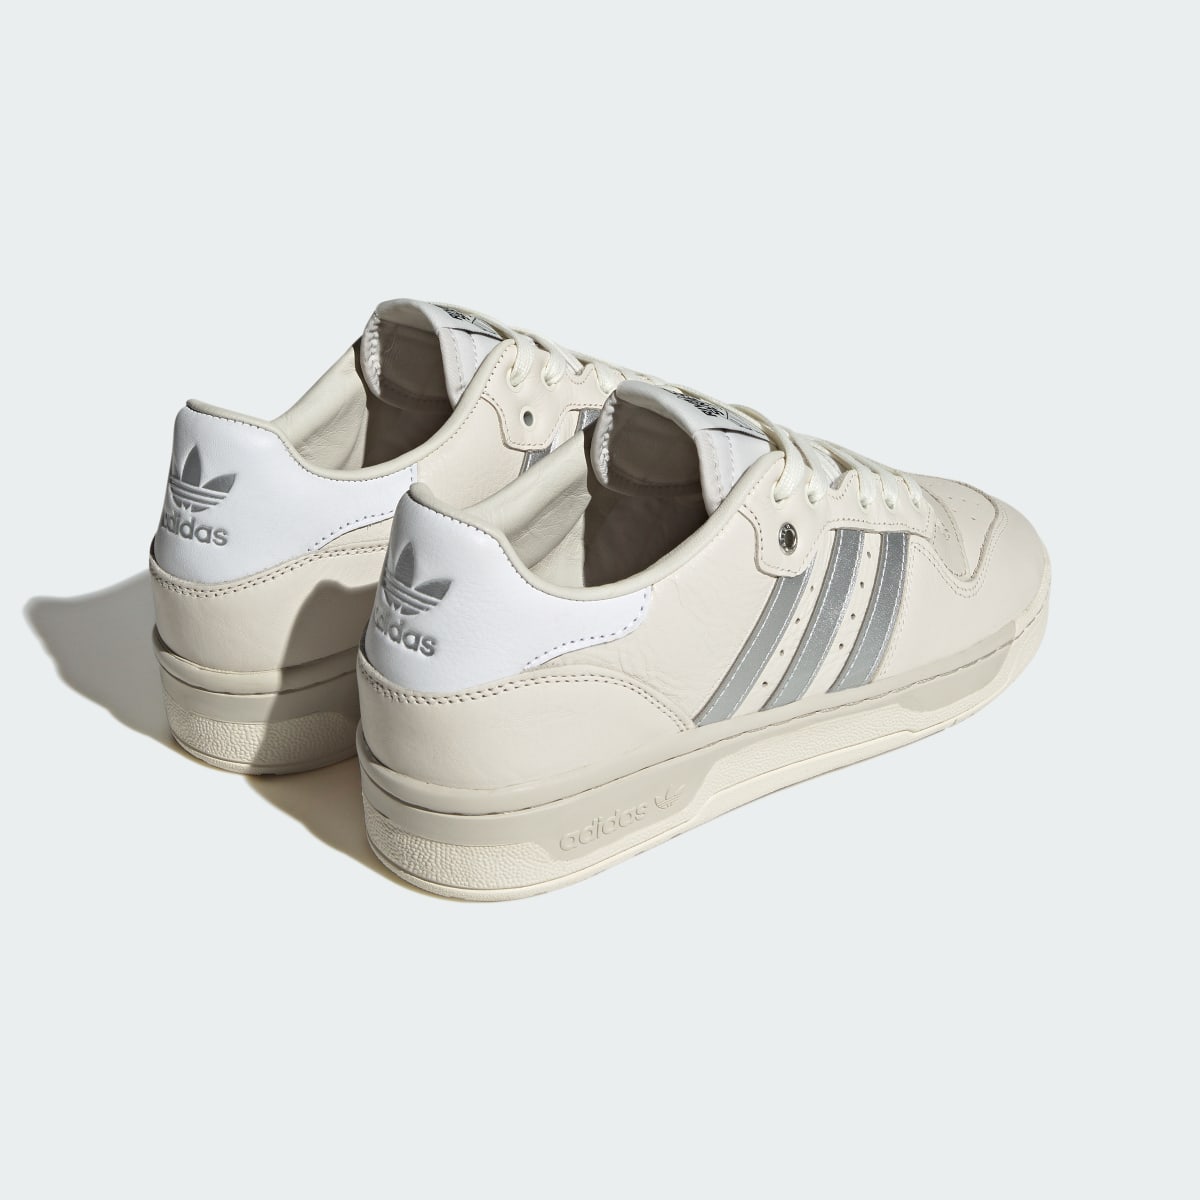 Adidas Rivalry Low Consortium Shoes. 7